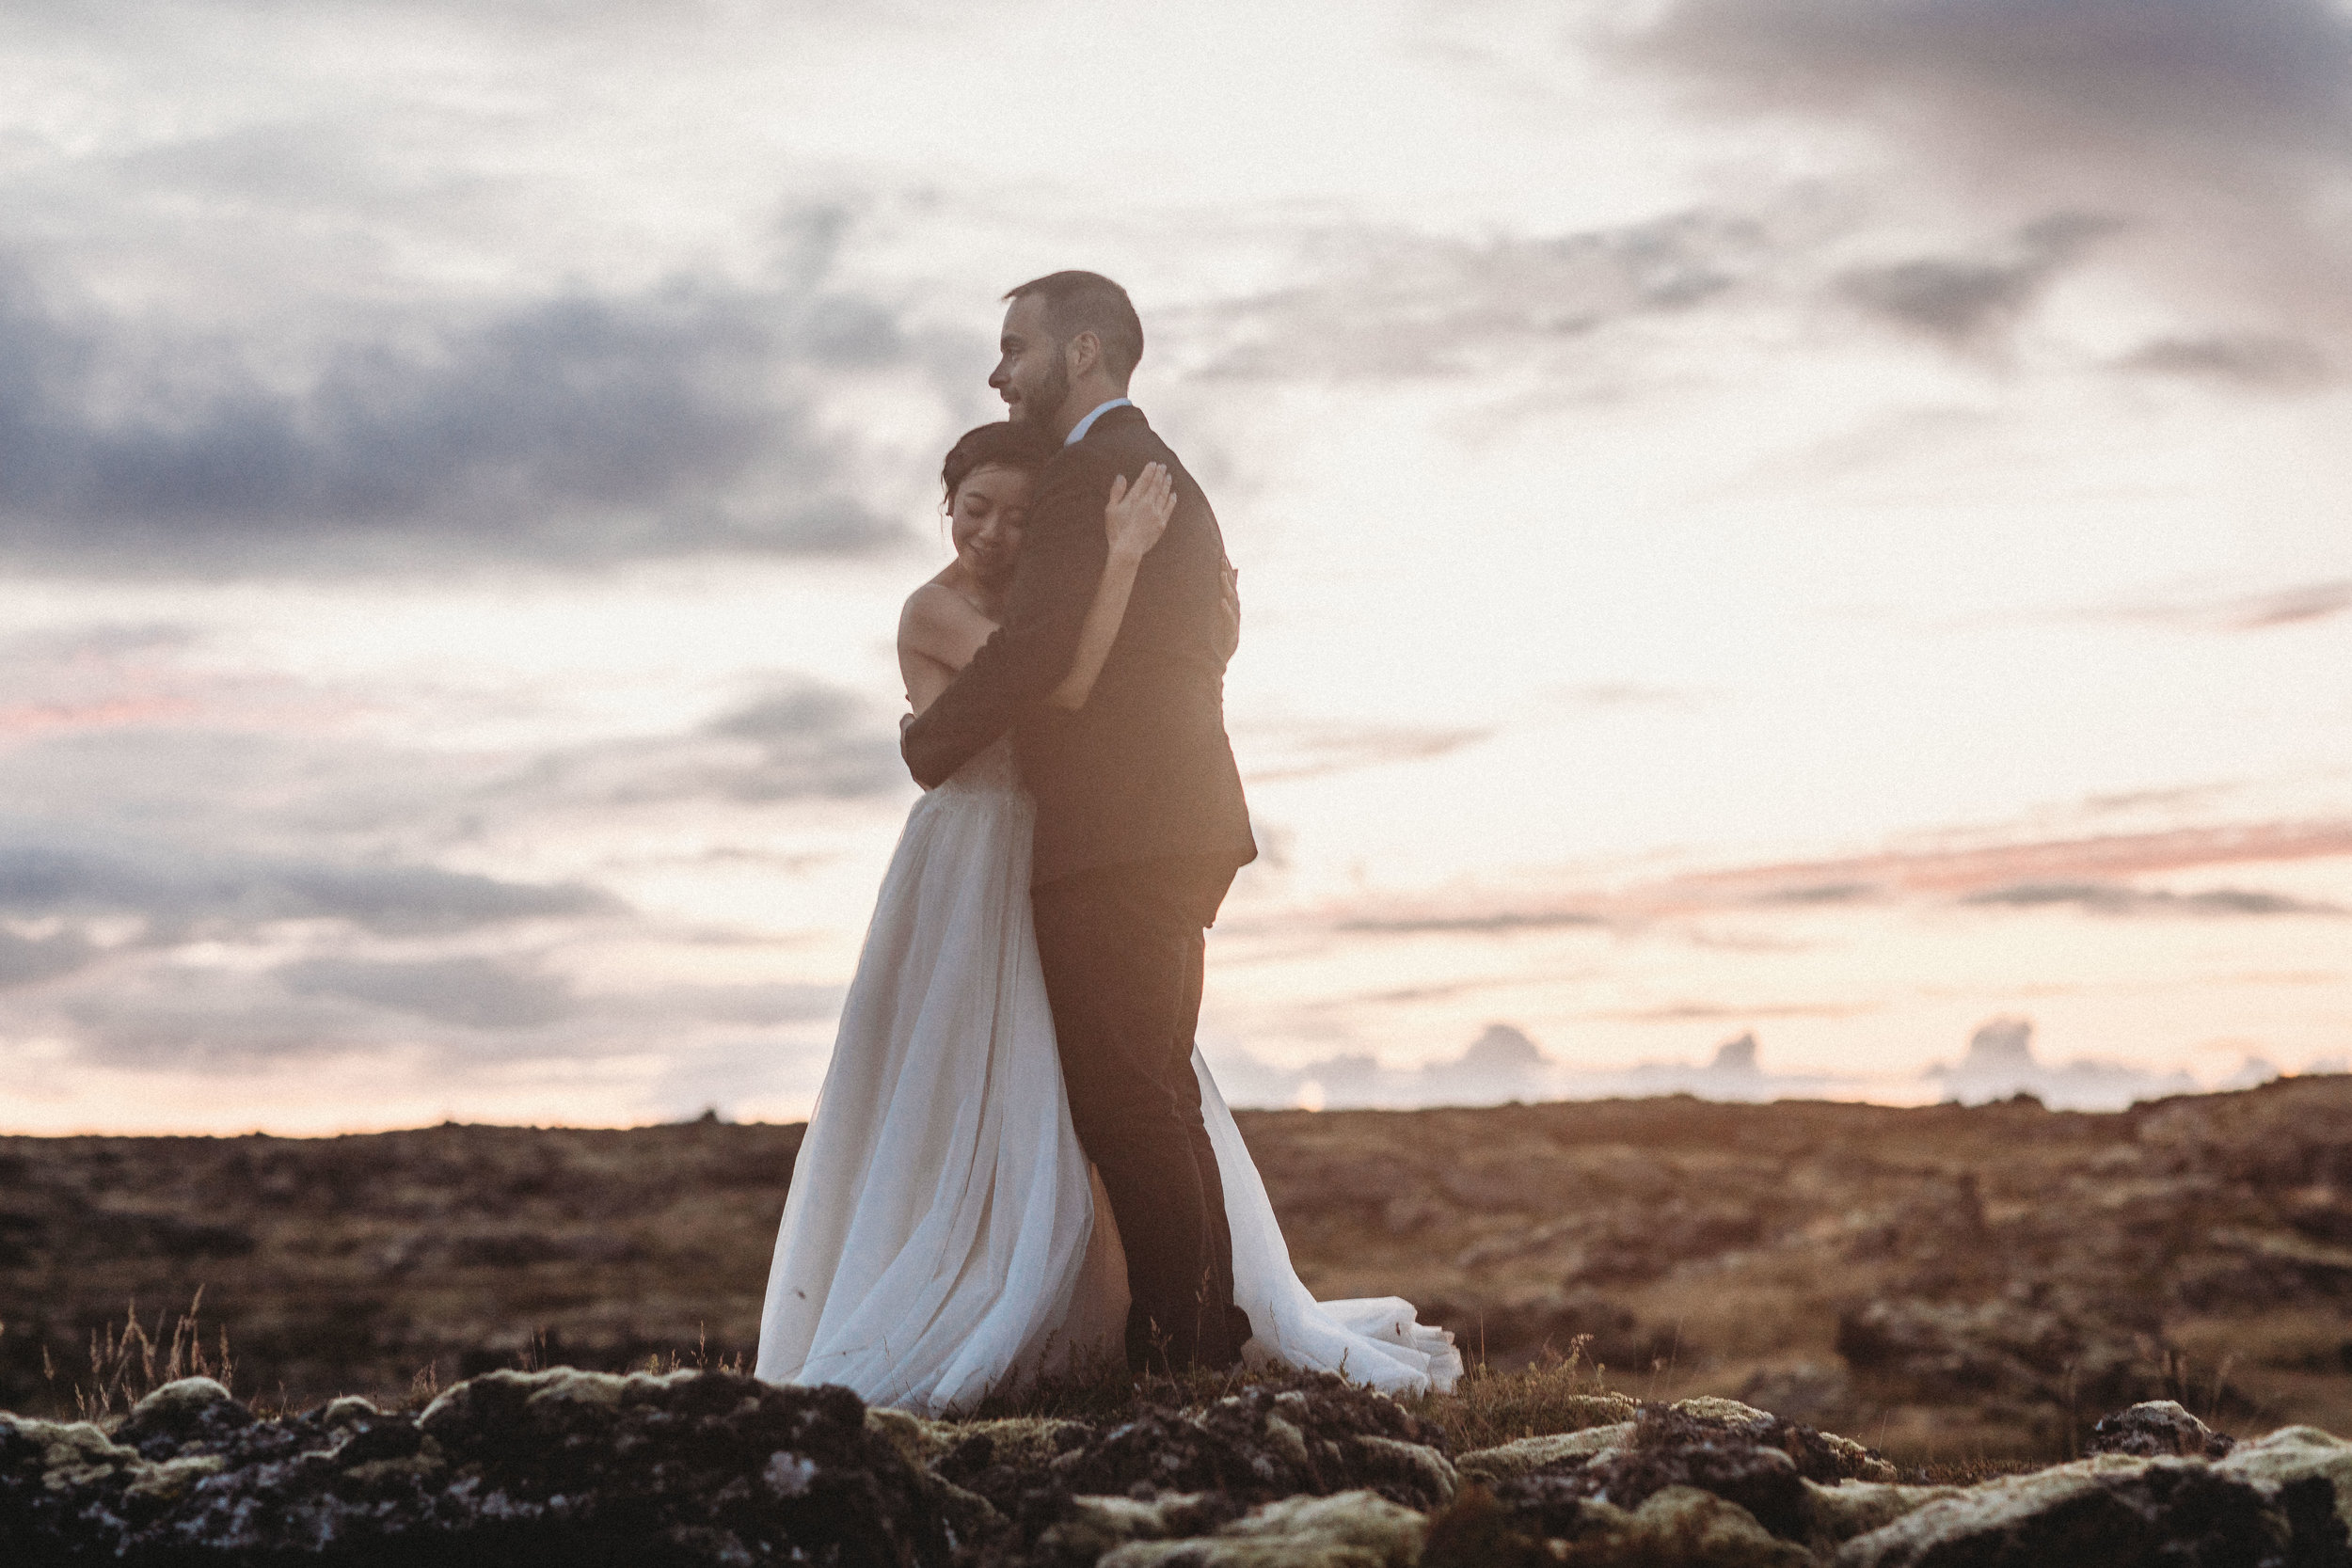 Best Iceland elopement photographer | Iceland wedding pictures